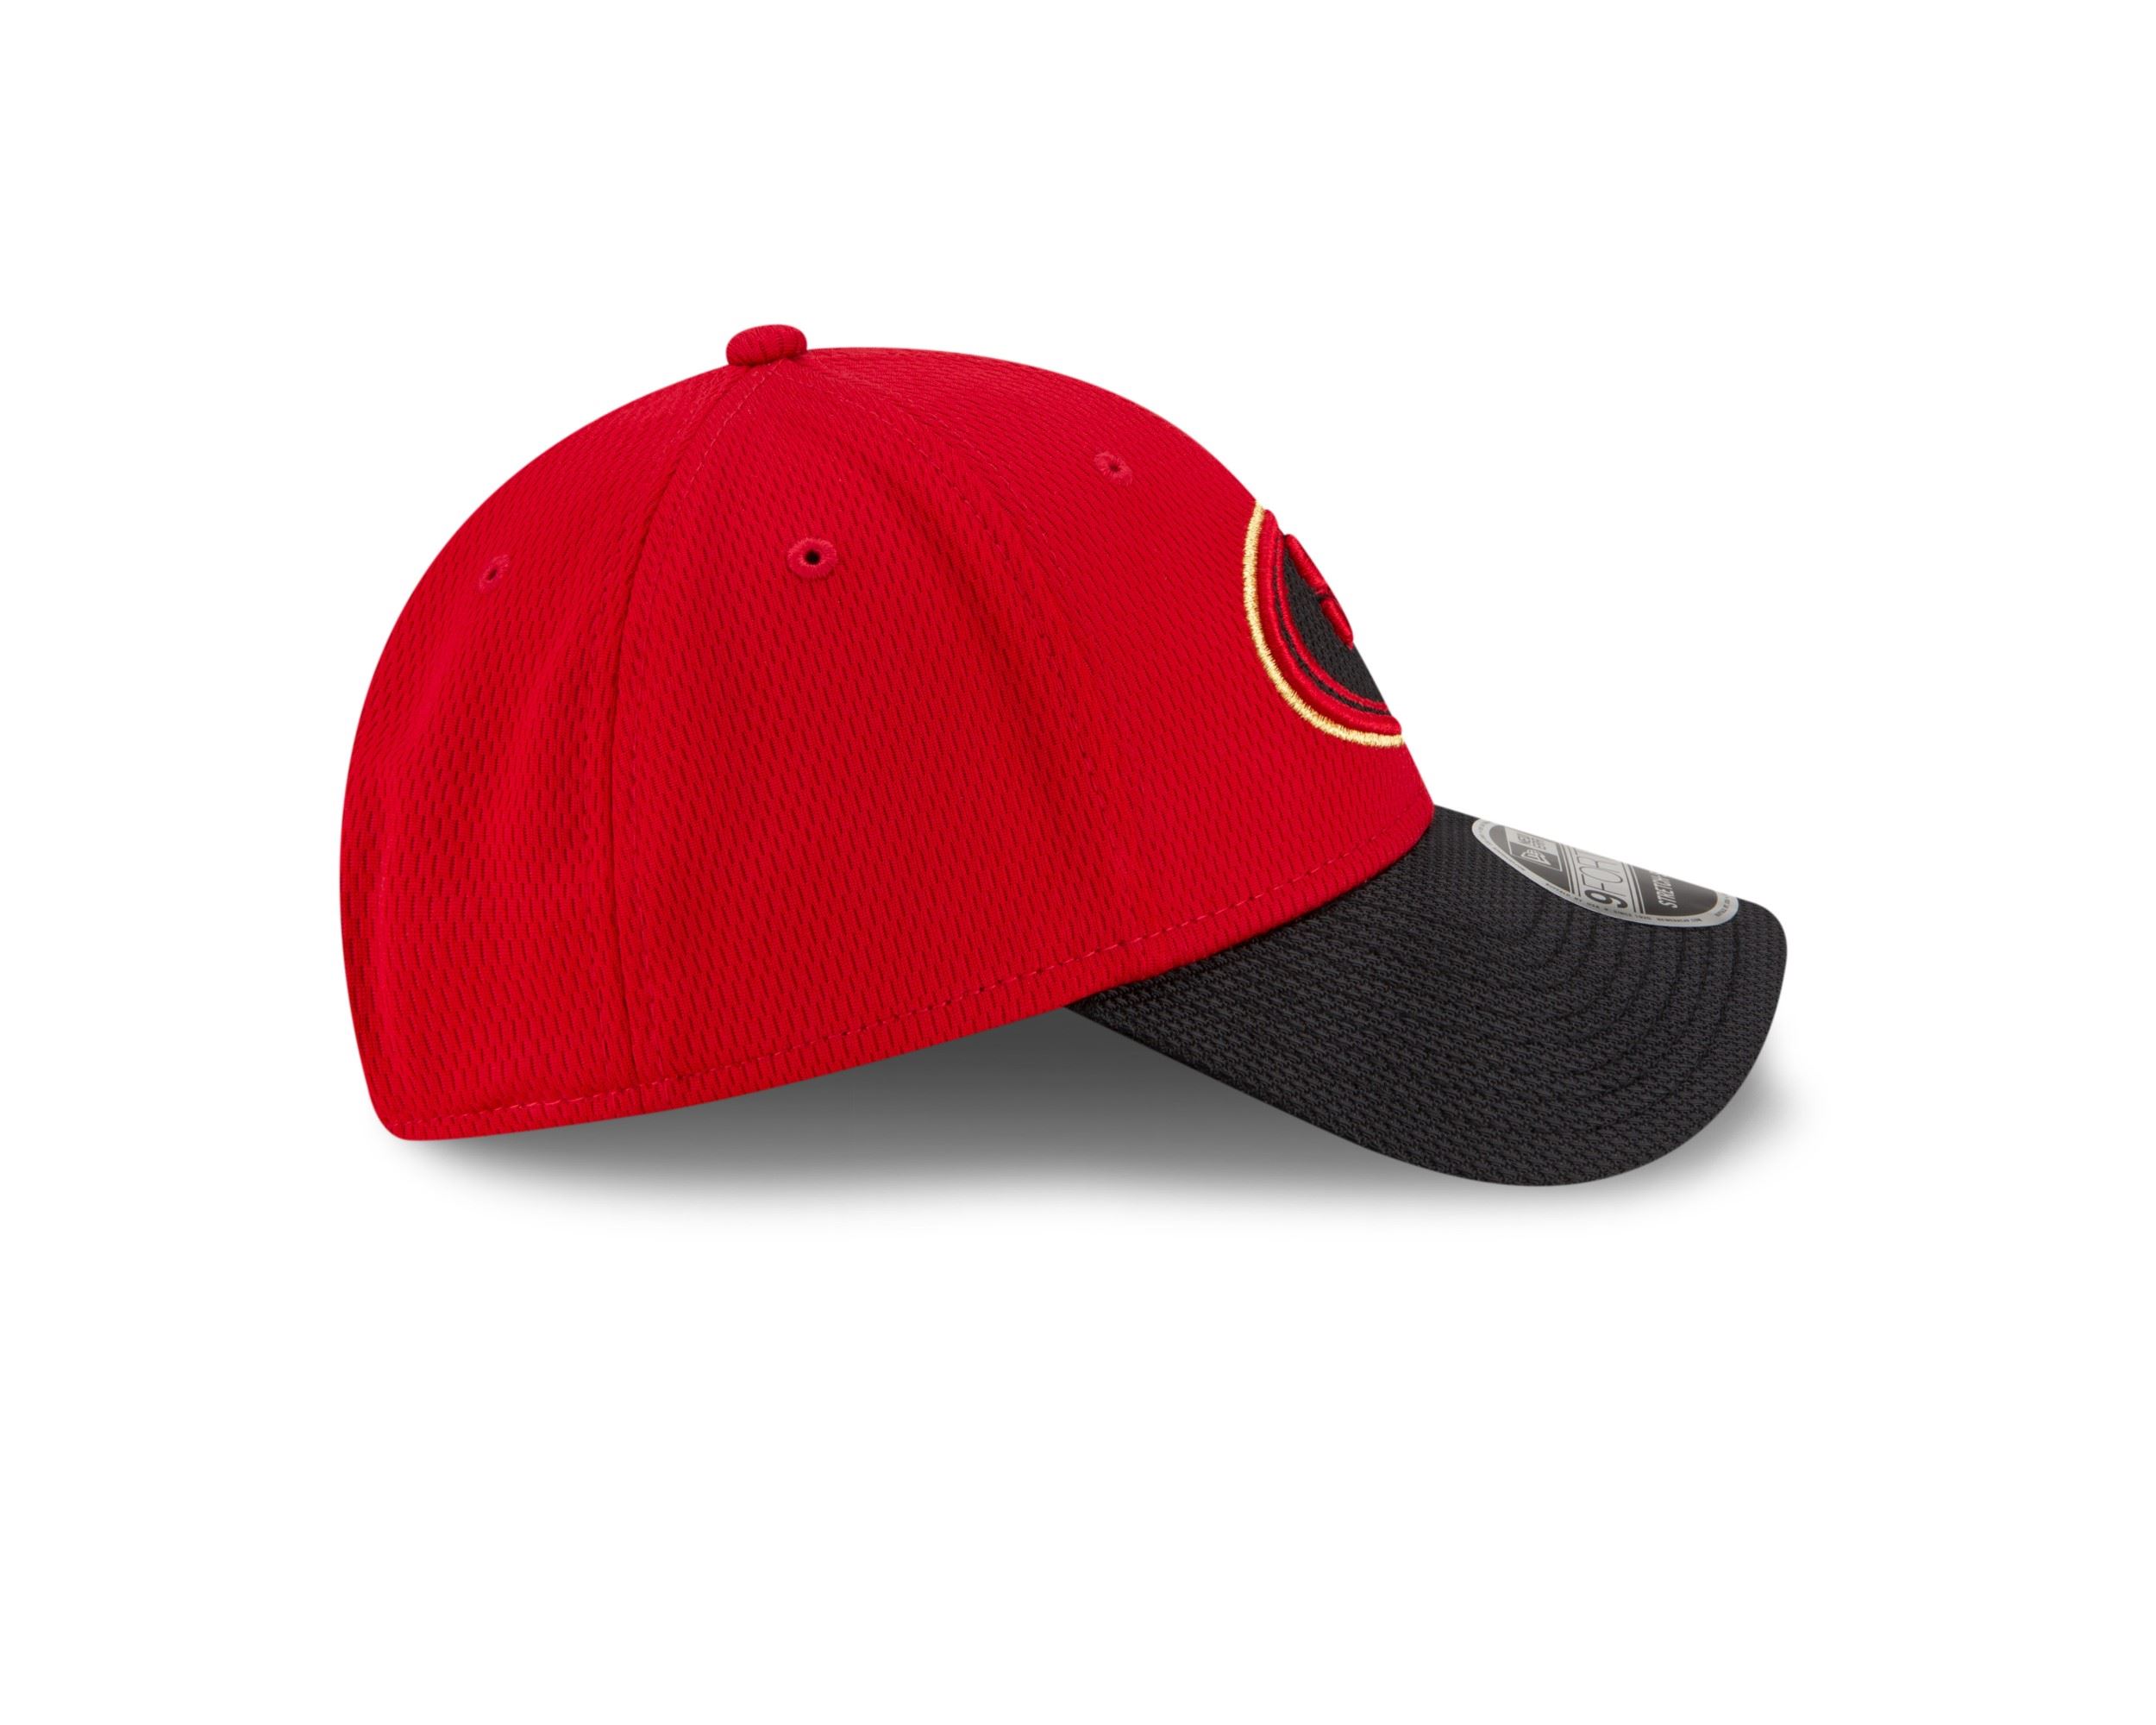 San Francisco 49ers NFL 2021 Sideline Road Red 9Forty Stretch Snap Cap New Era